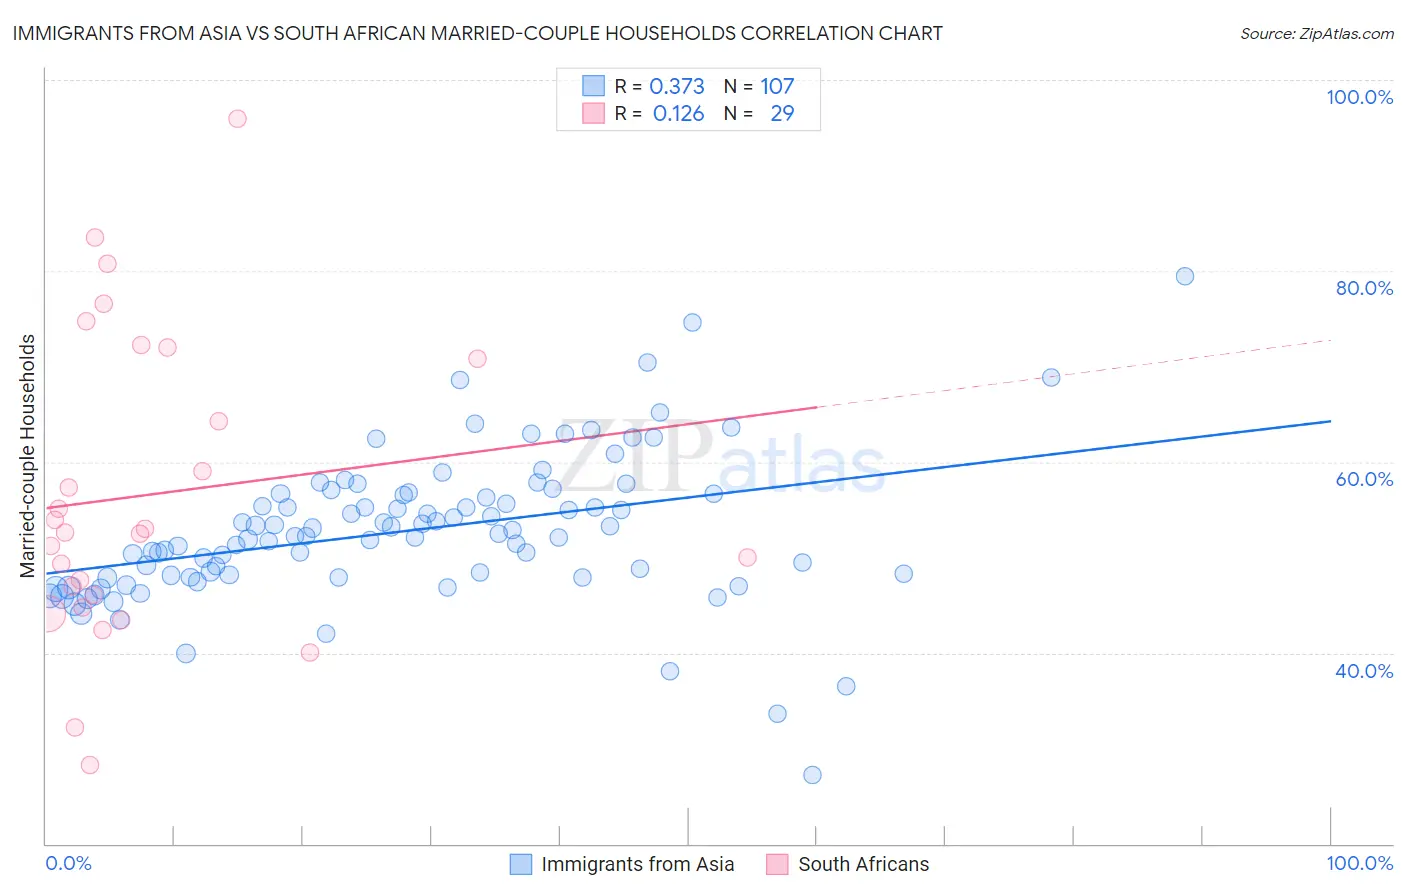 Immigrants from Asia vs South African Married-couple Households